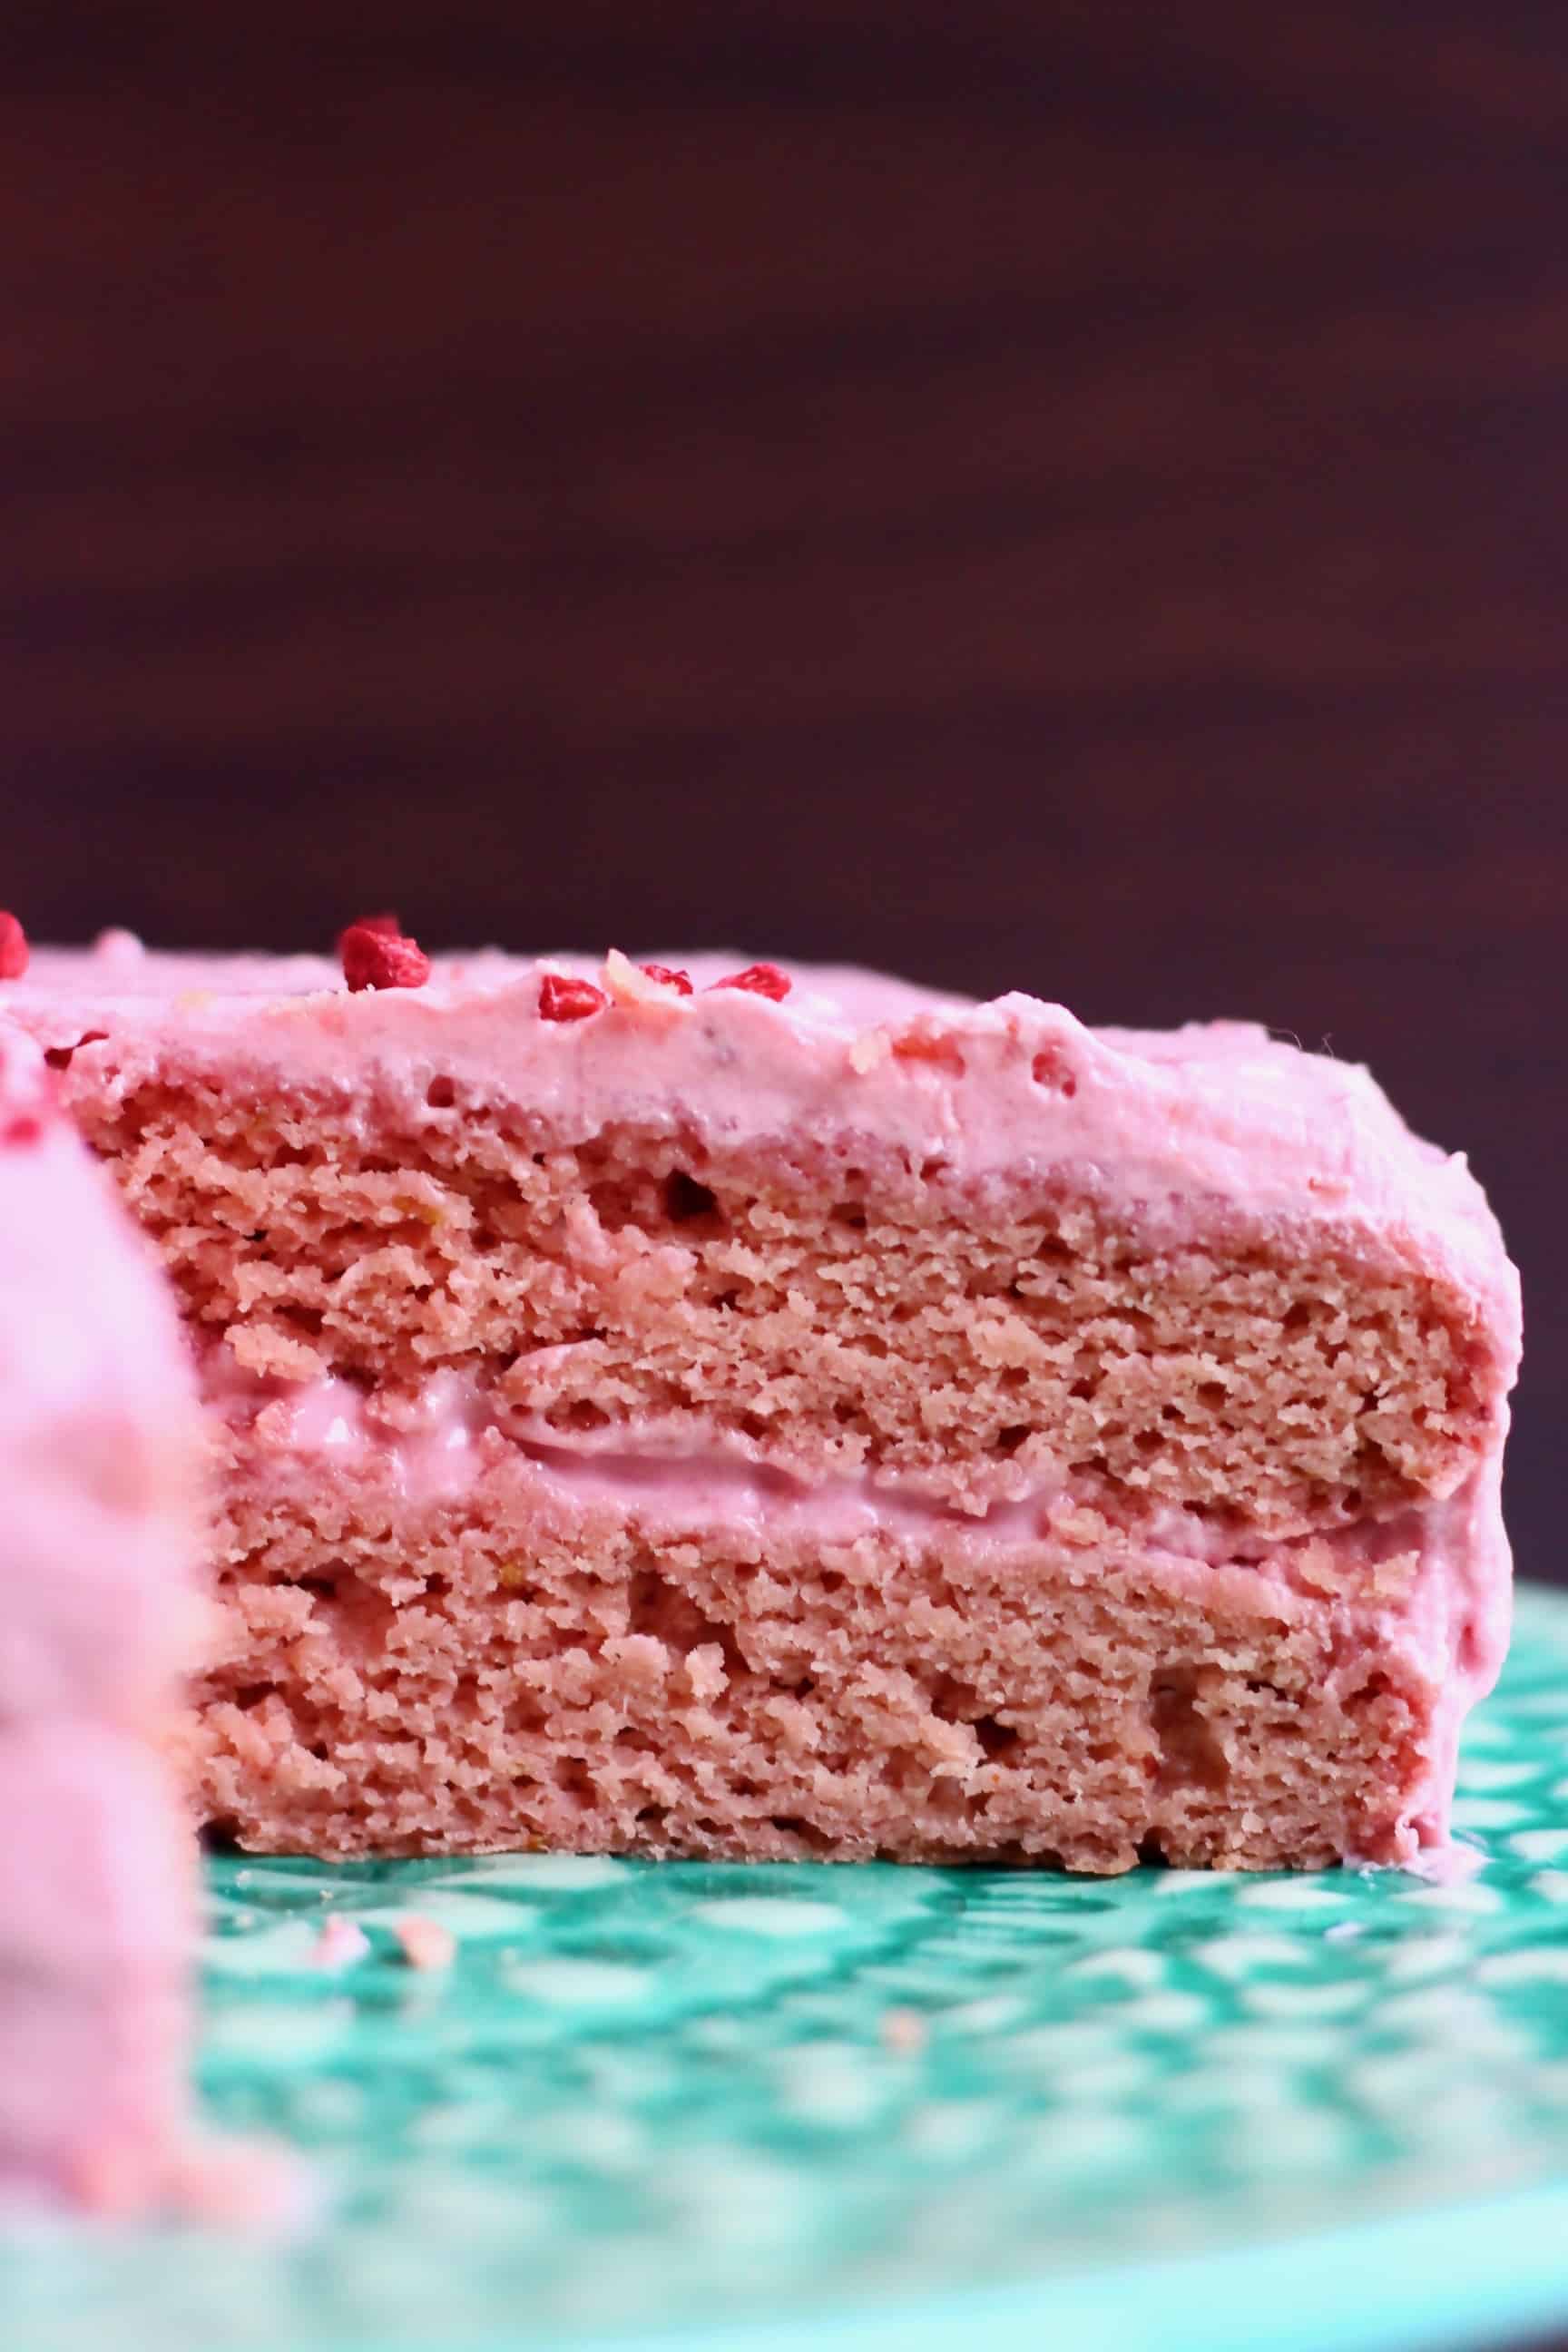 A sliced pink sponge cake with pink frosting on a green cake stand against a dark brown background